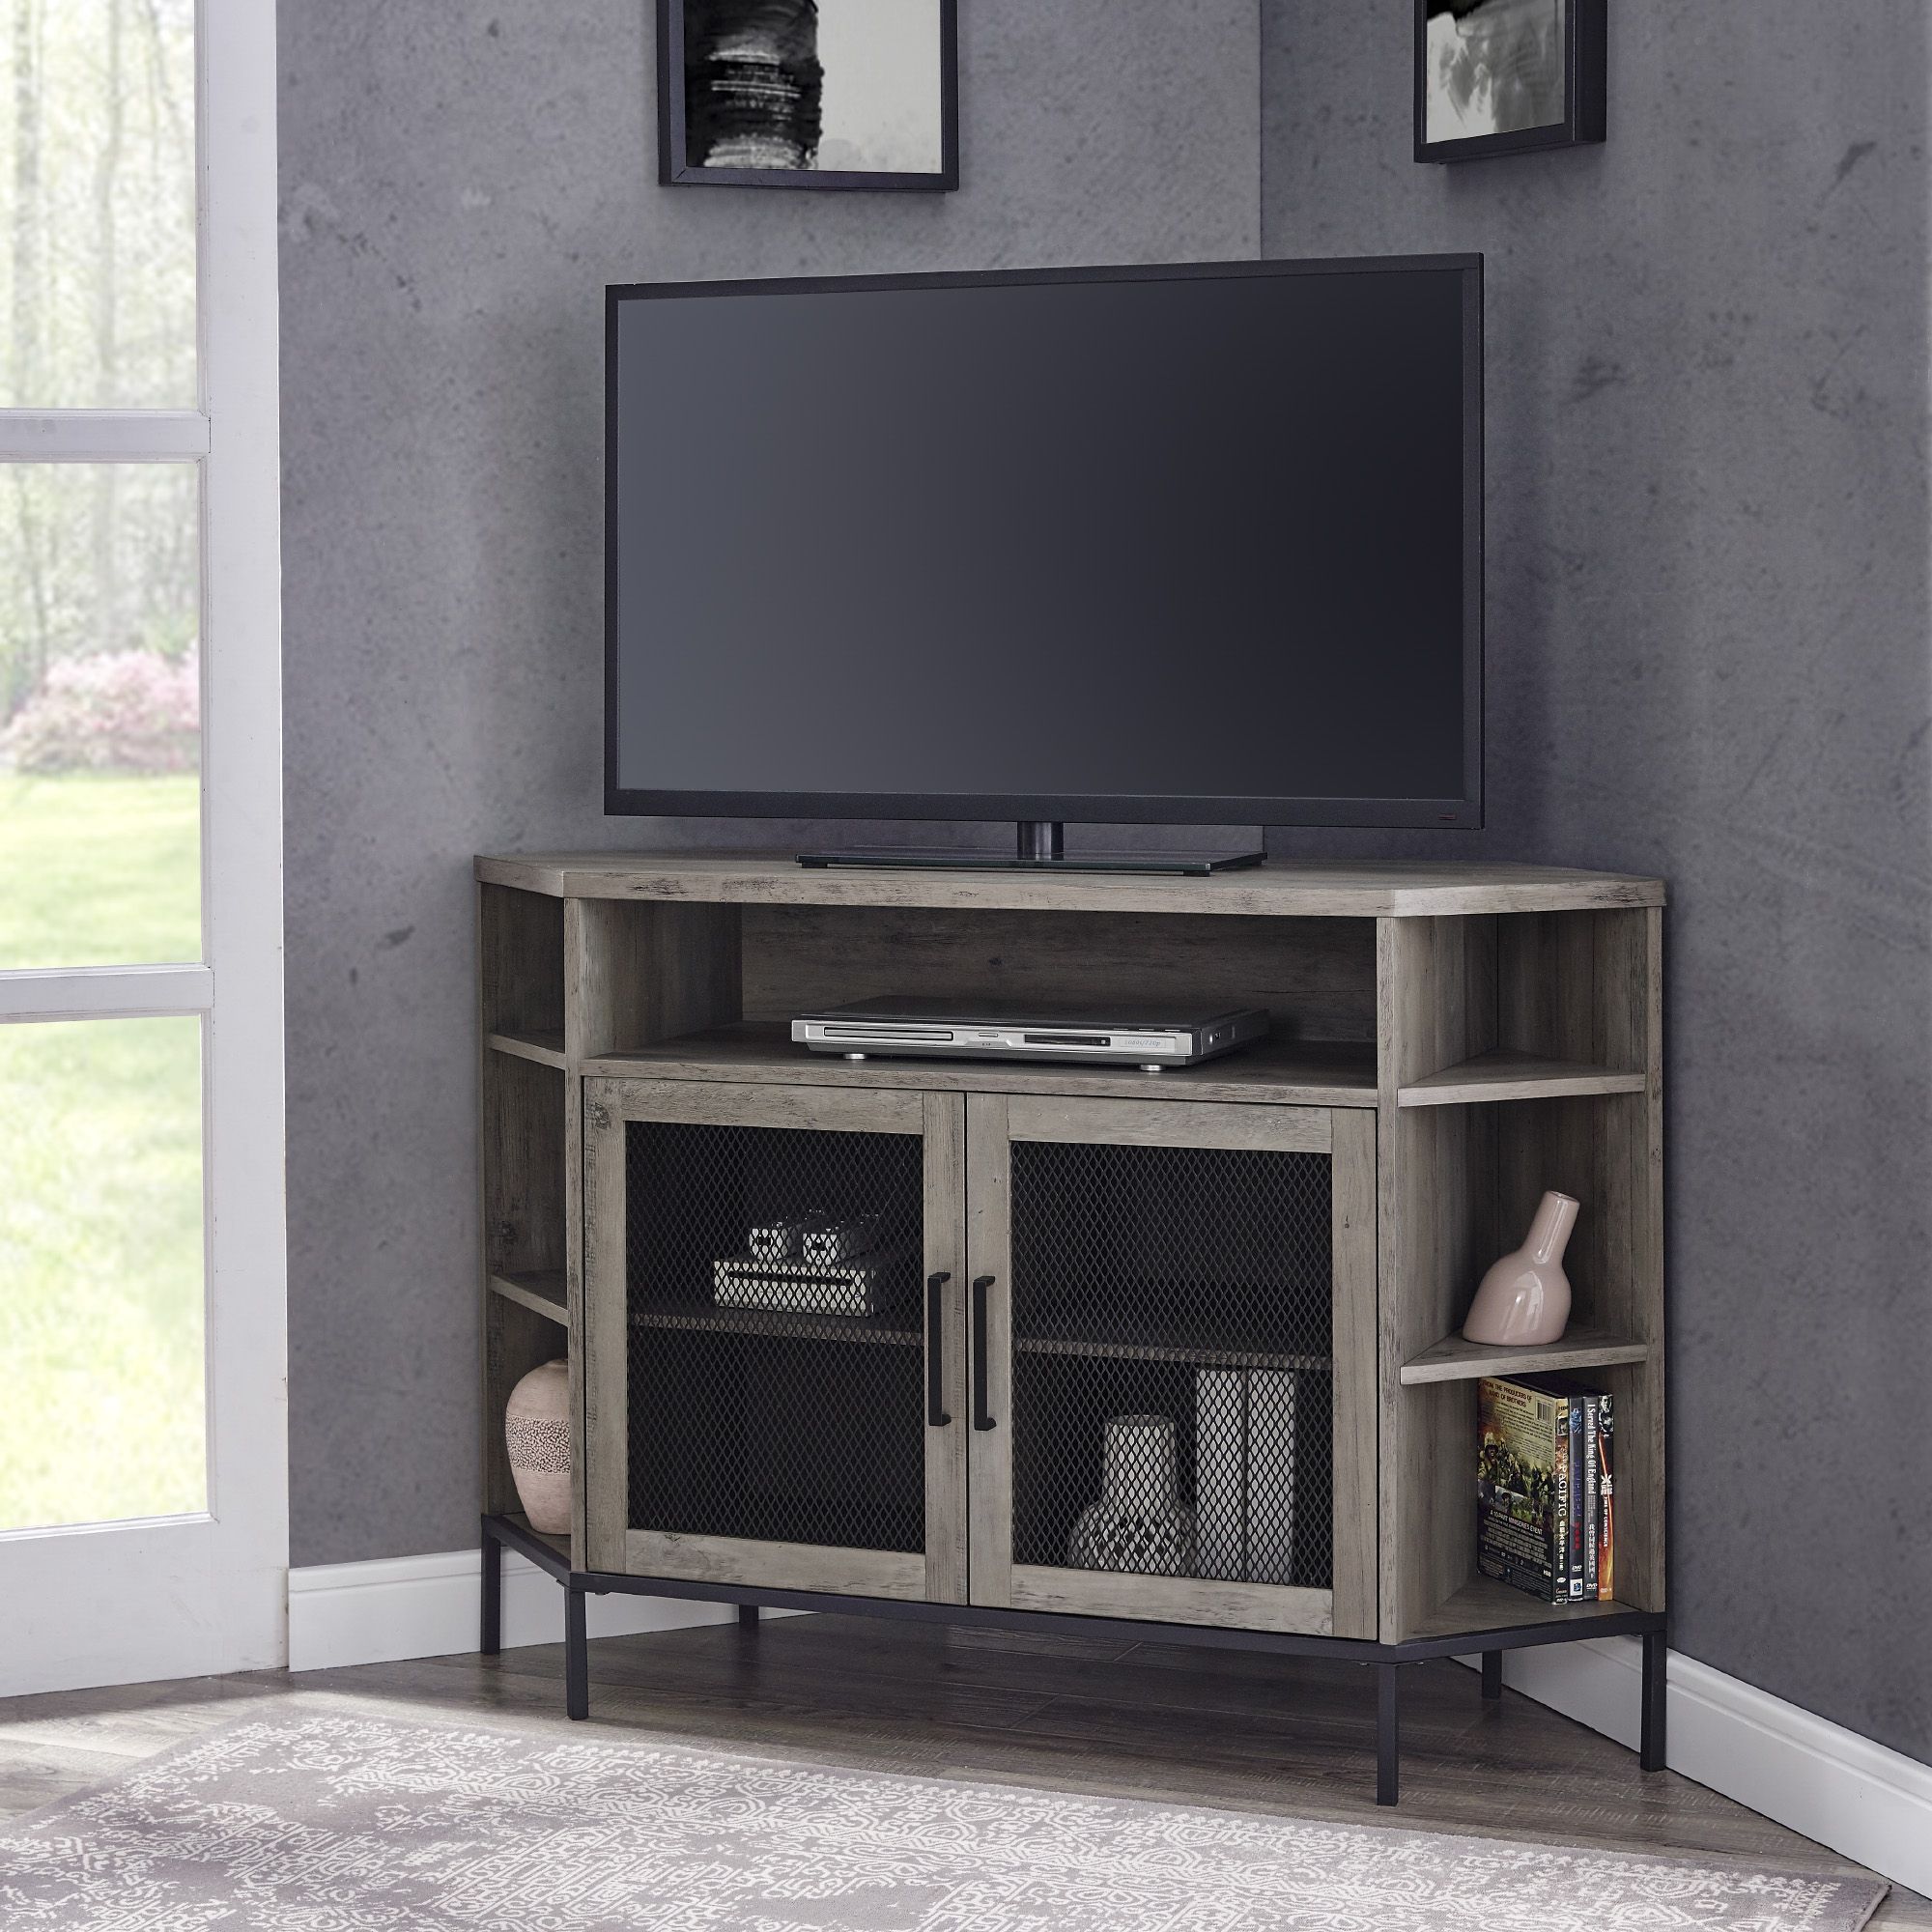 Manor Park Industrial Corner Tv Console For Tvs Up To 52 Within Industrial Corner Tv Stands (View 3 of 15)